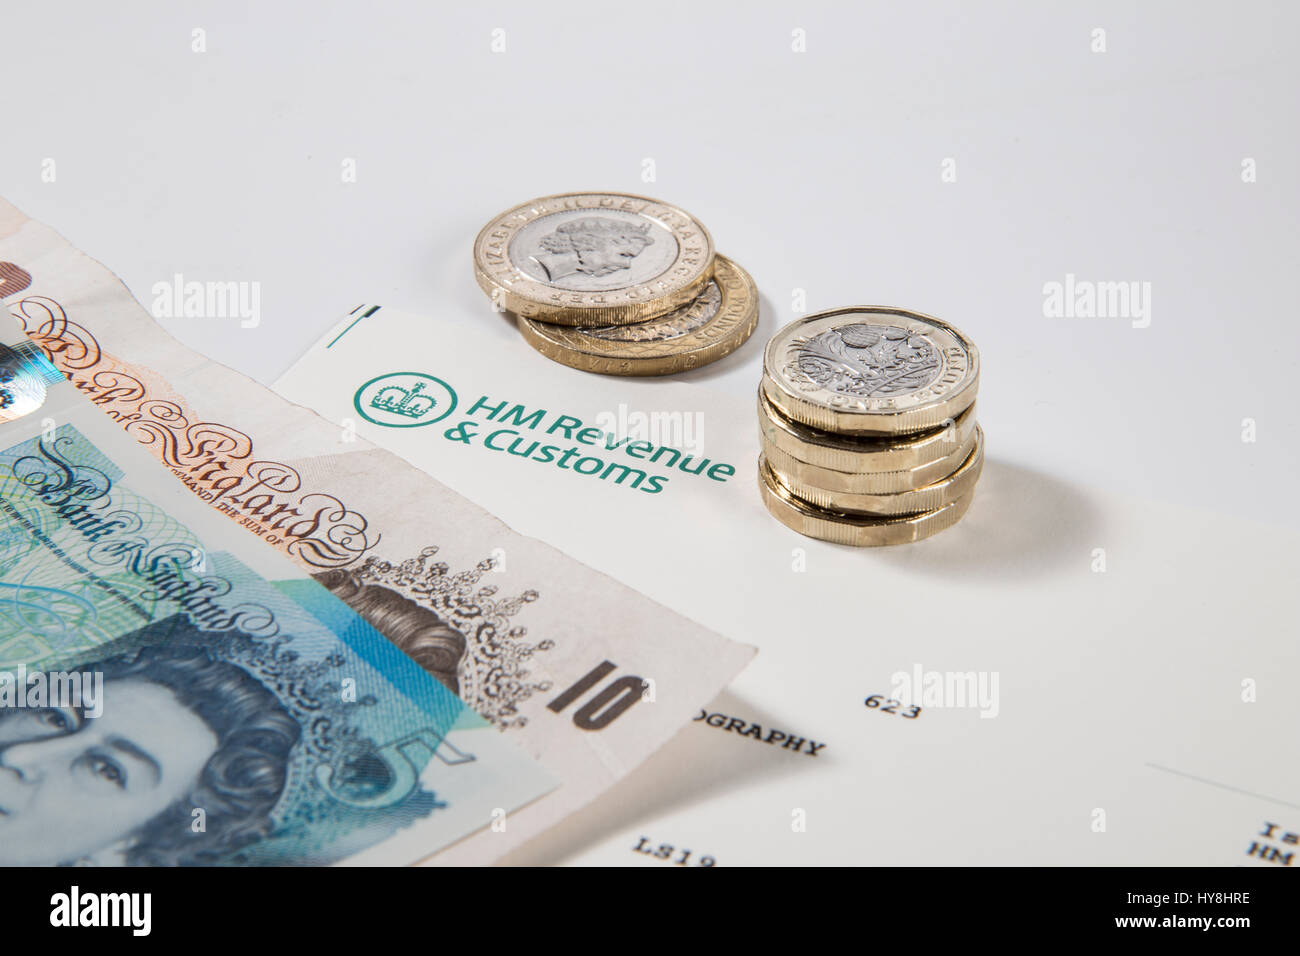 New £1 pound coins, £2 pound coins and £5 pound notes on an HM Revenues & Customs document Stock Photo